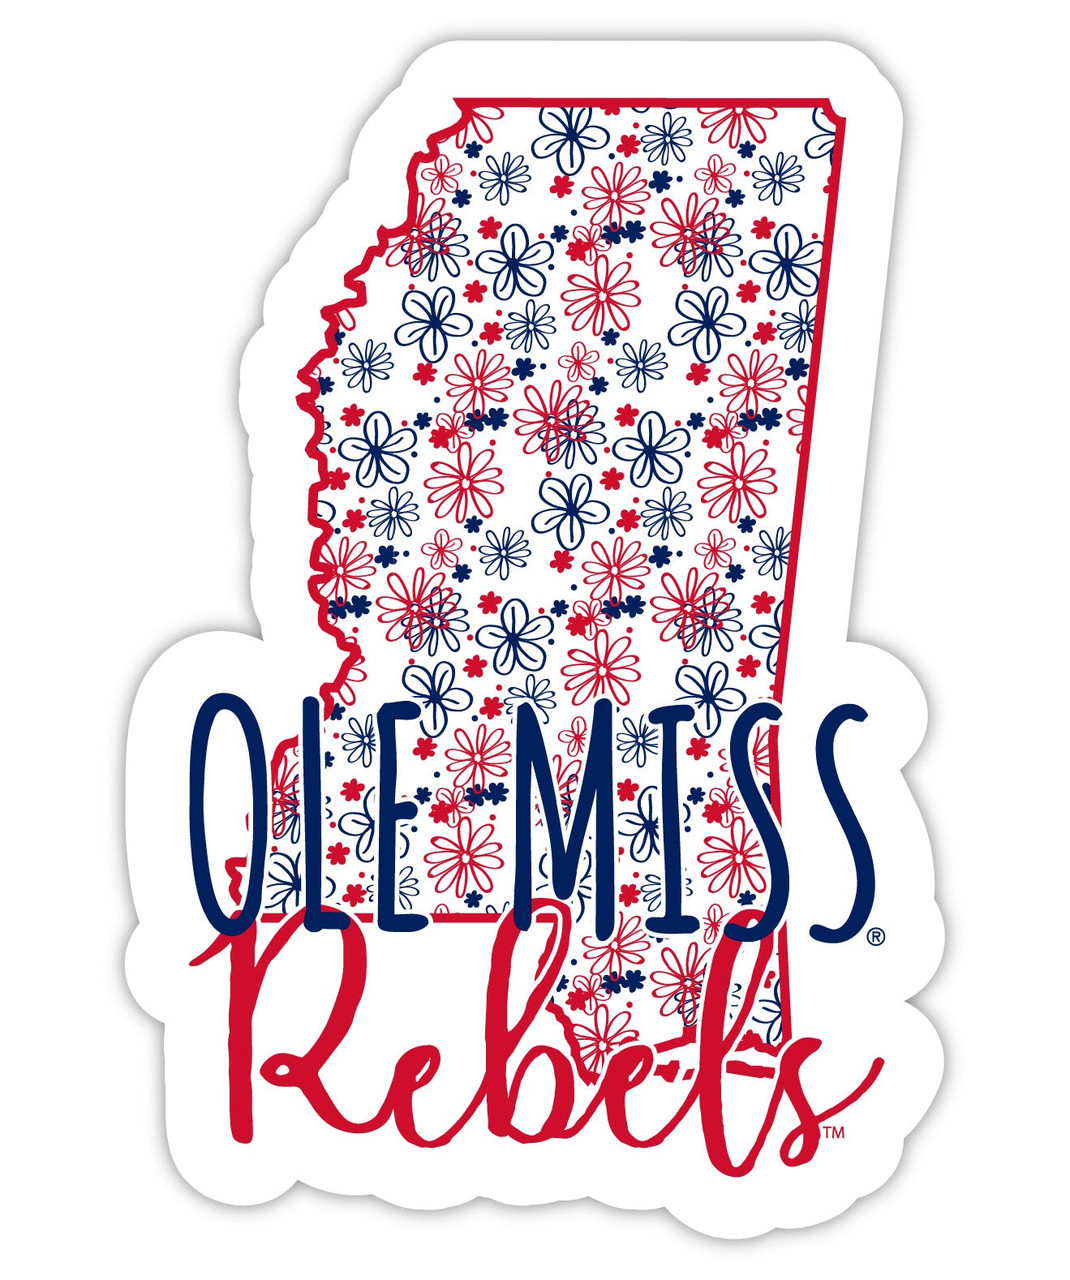 Mississippi Rebels "Ole Miss" Floral State Die Cut Decal 2-Inch